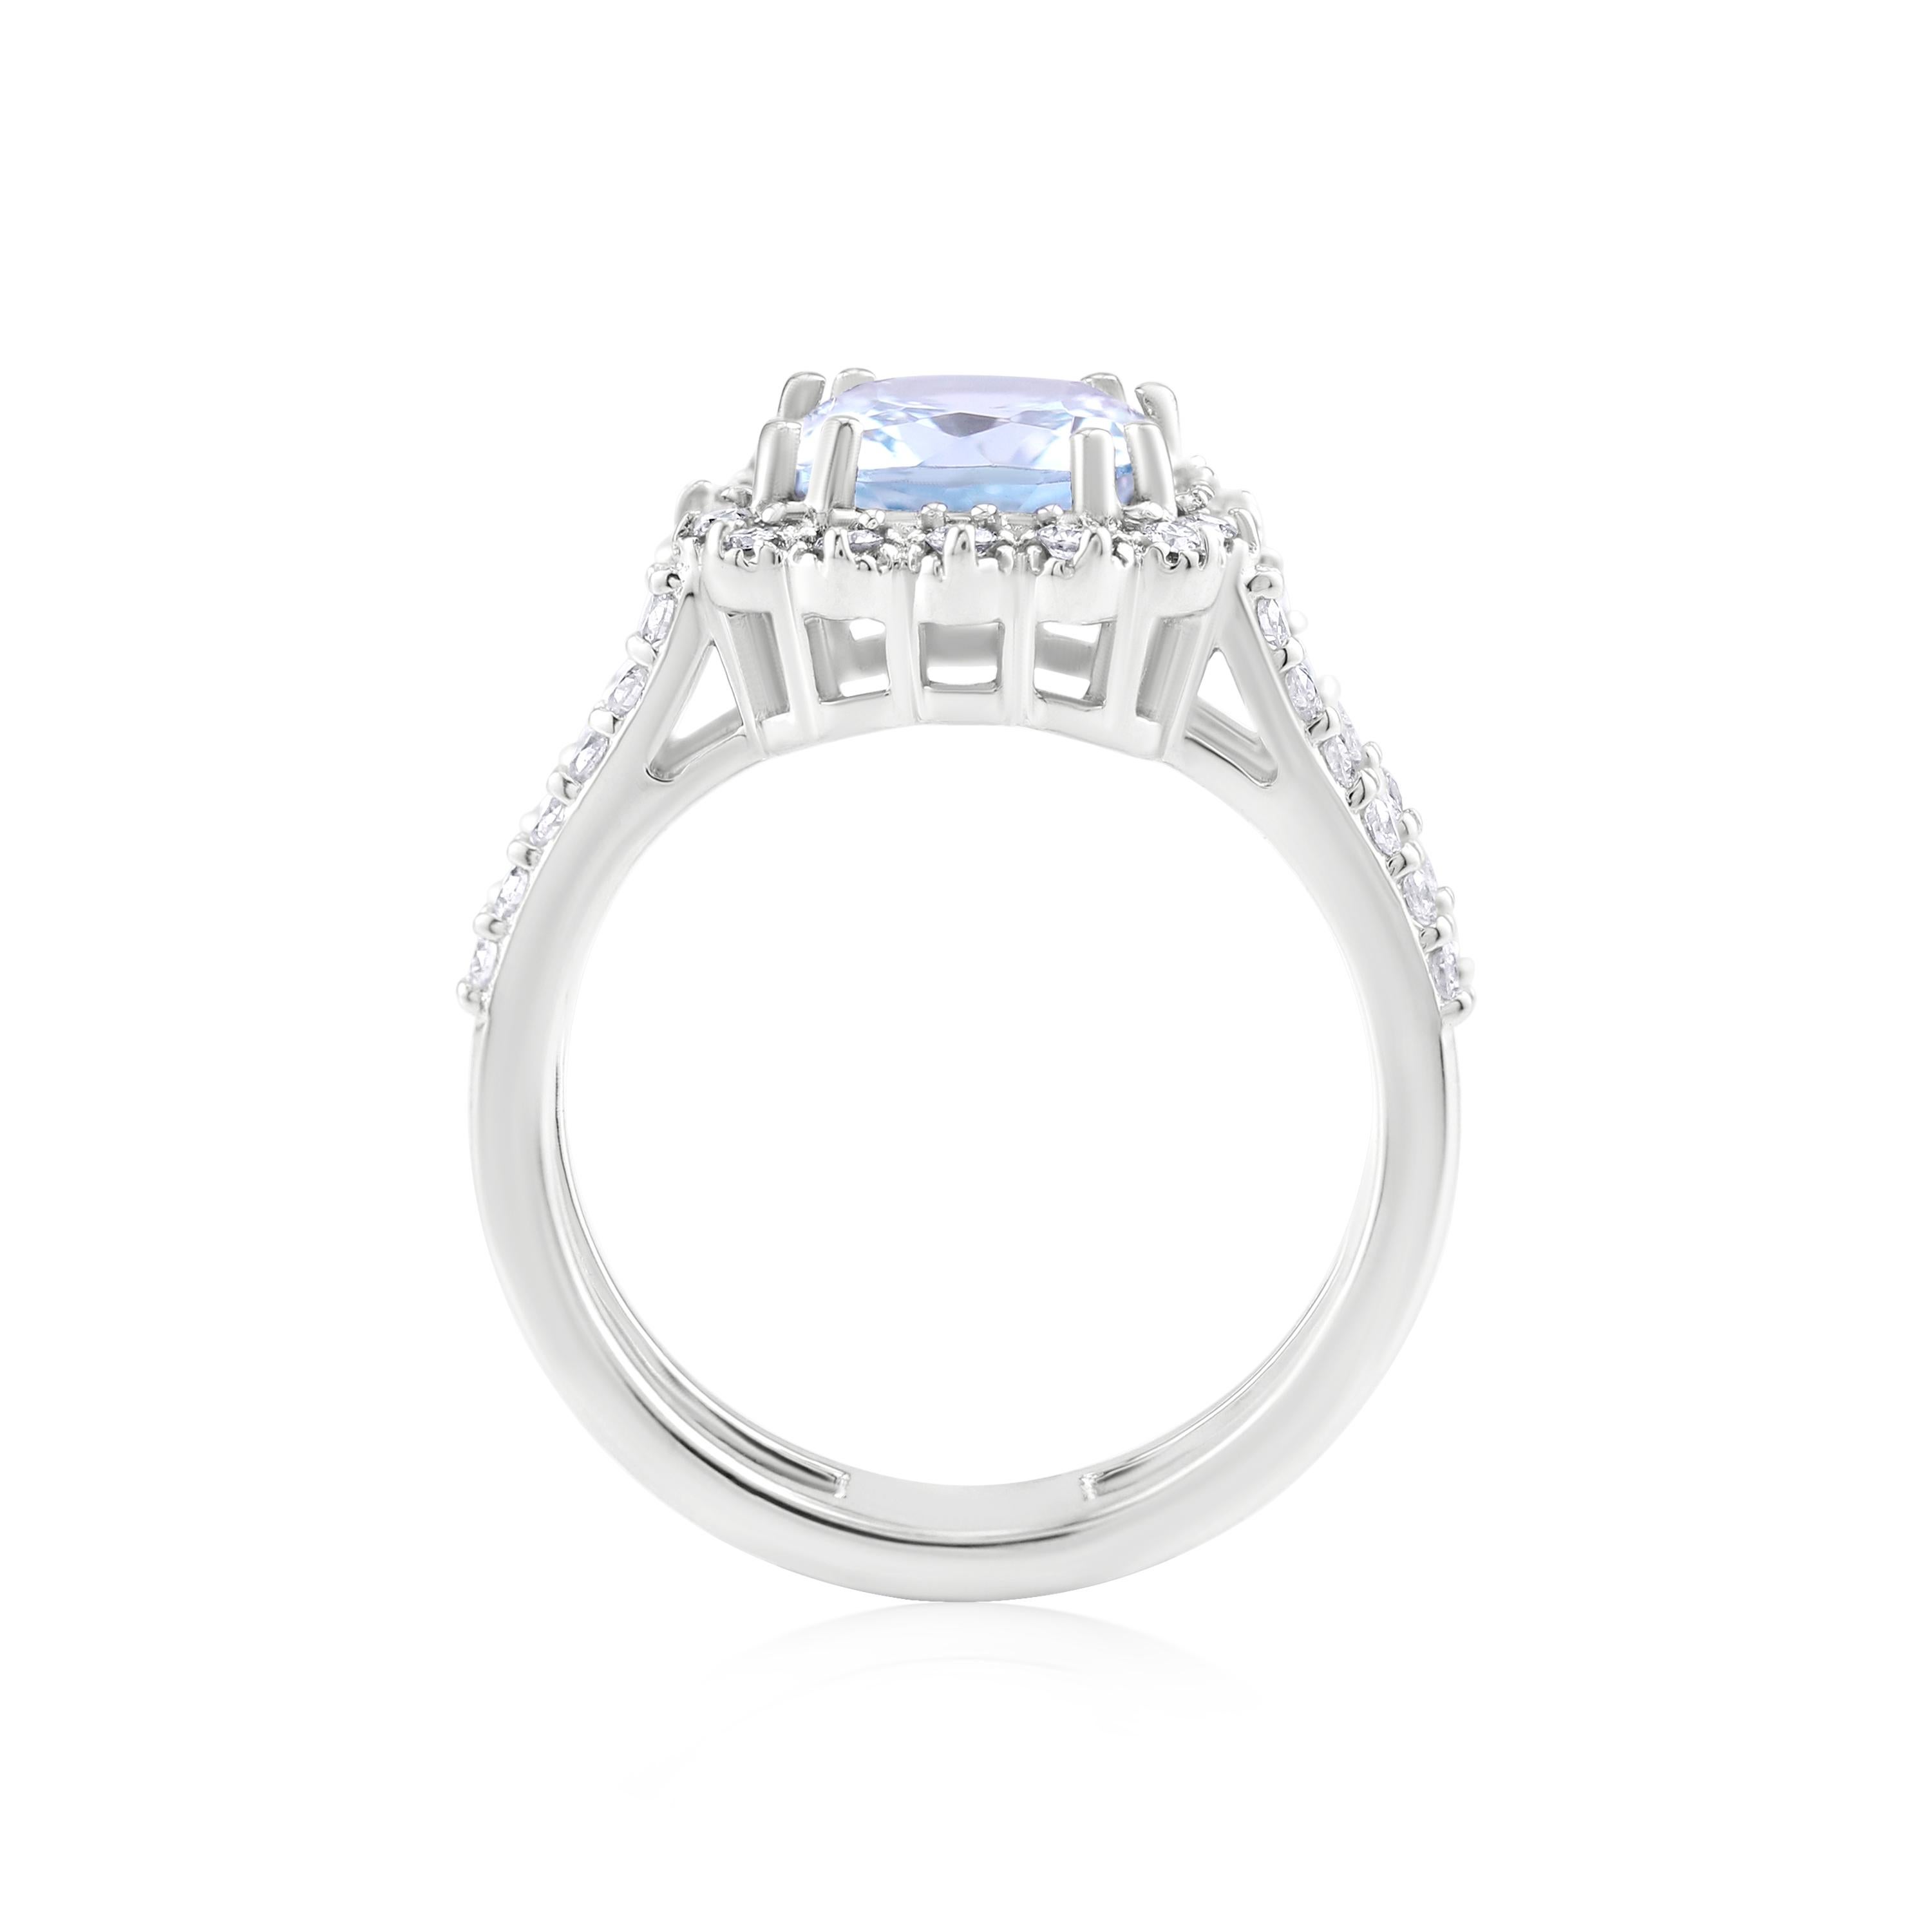 Known to inspire calm energy , aquamarine adds serene beauty to any look. The ring features a 2.66 carat cushion cut aquamarine illuminated by .58 ct. t.w. round brilliant cut diamonds in 14k white gold. Diamond split ring shank ring by Gemistry.